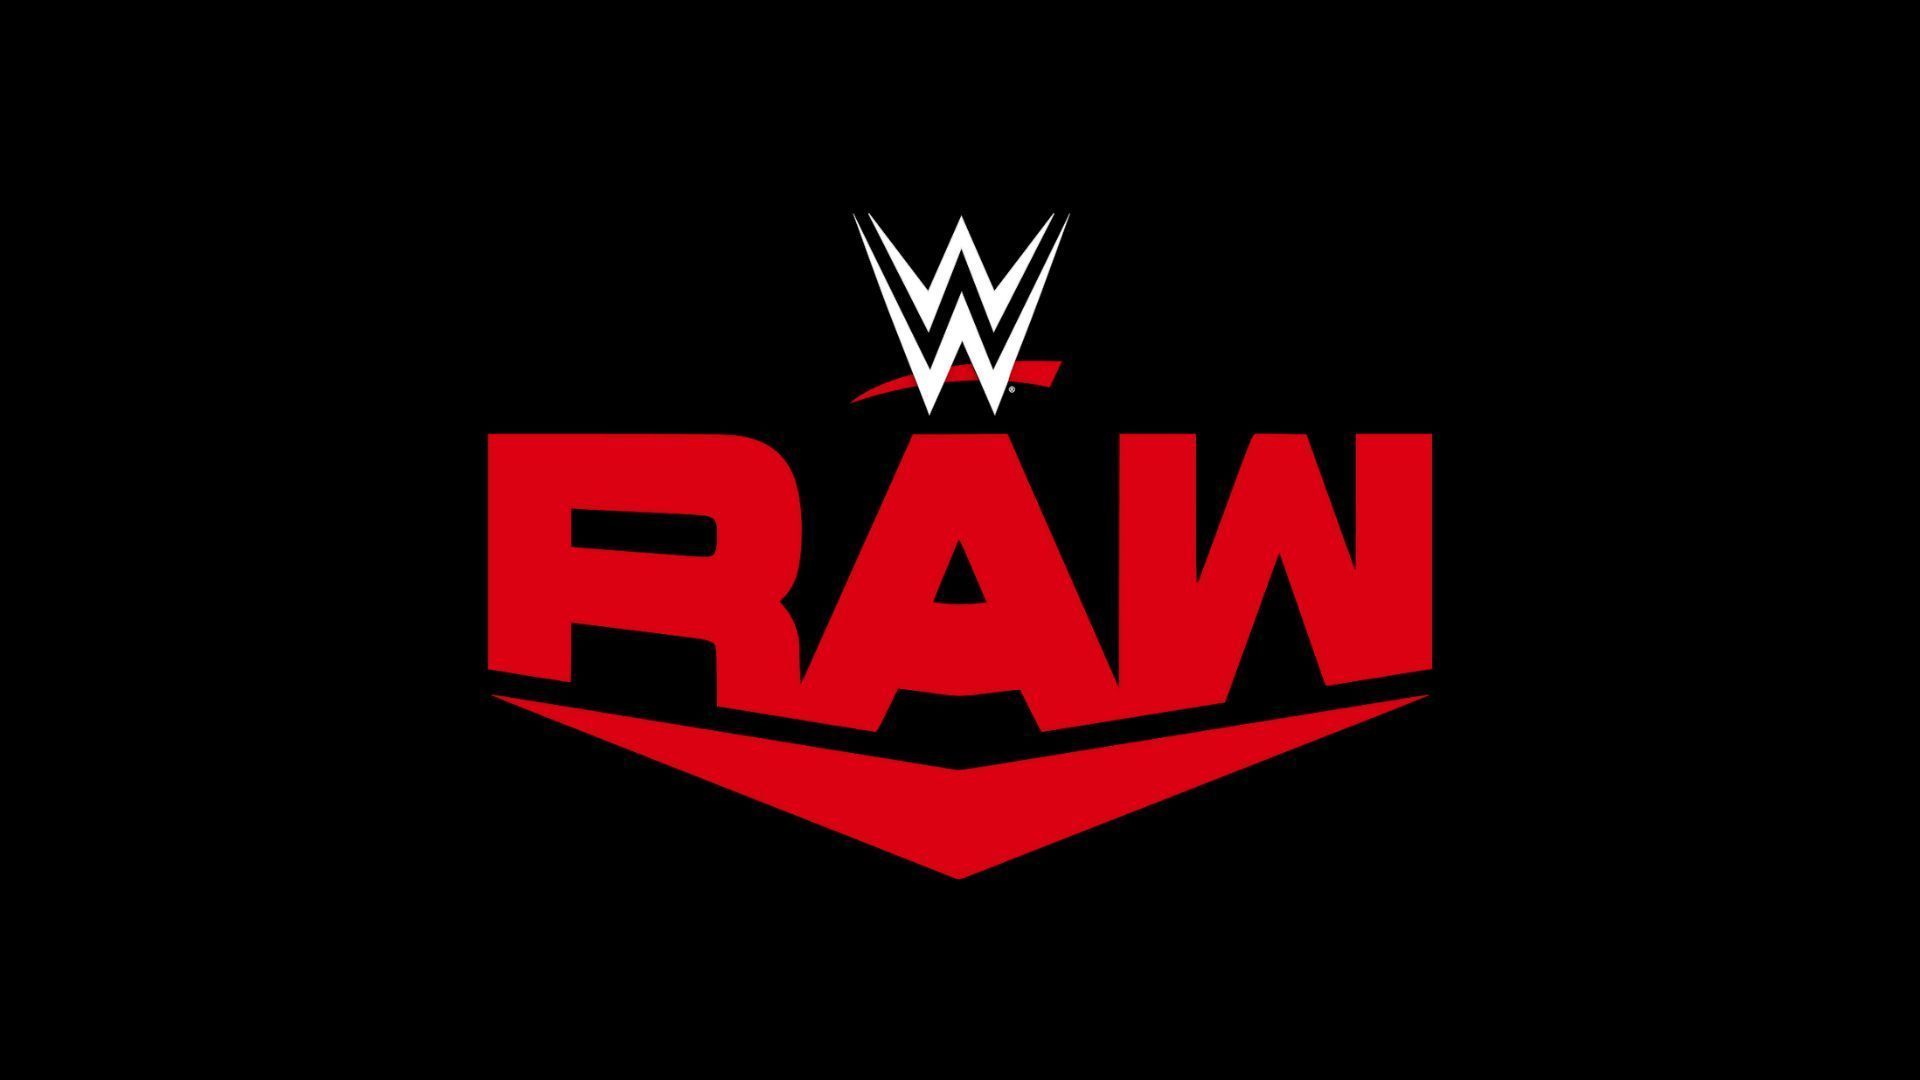 WWE RAW will host the second night of the draft